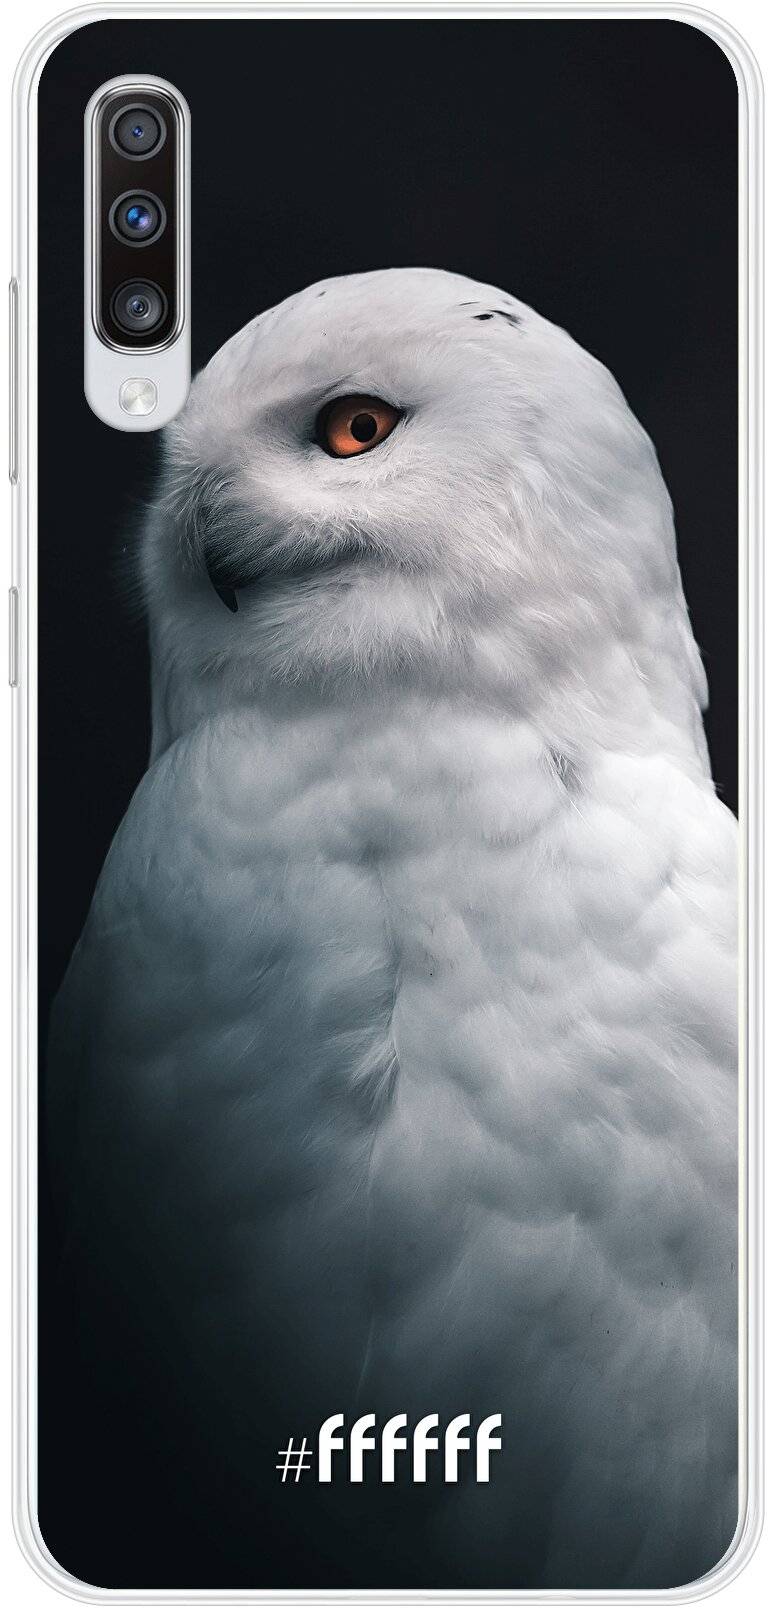 Witte Uil Galaxy A70